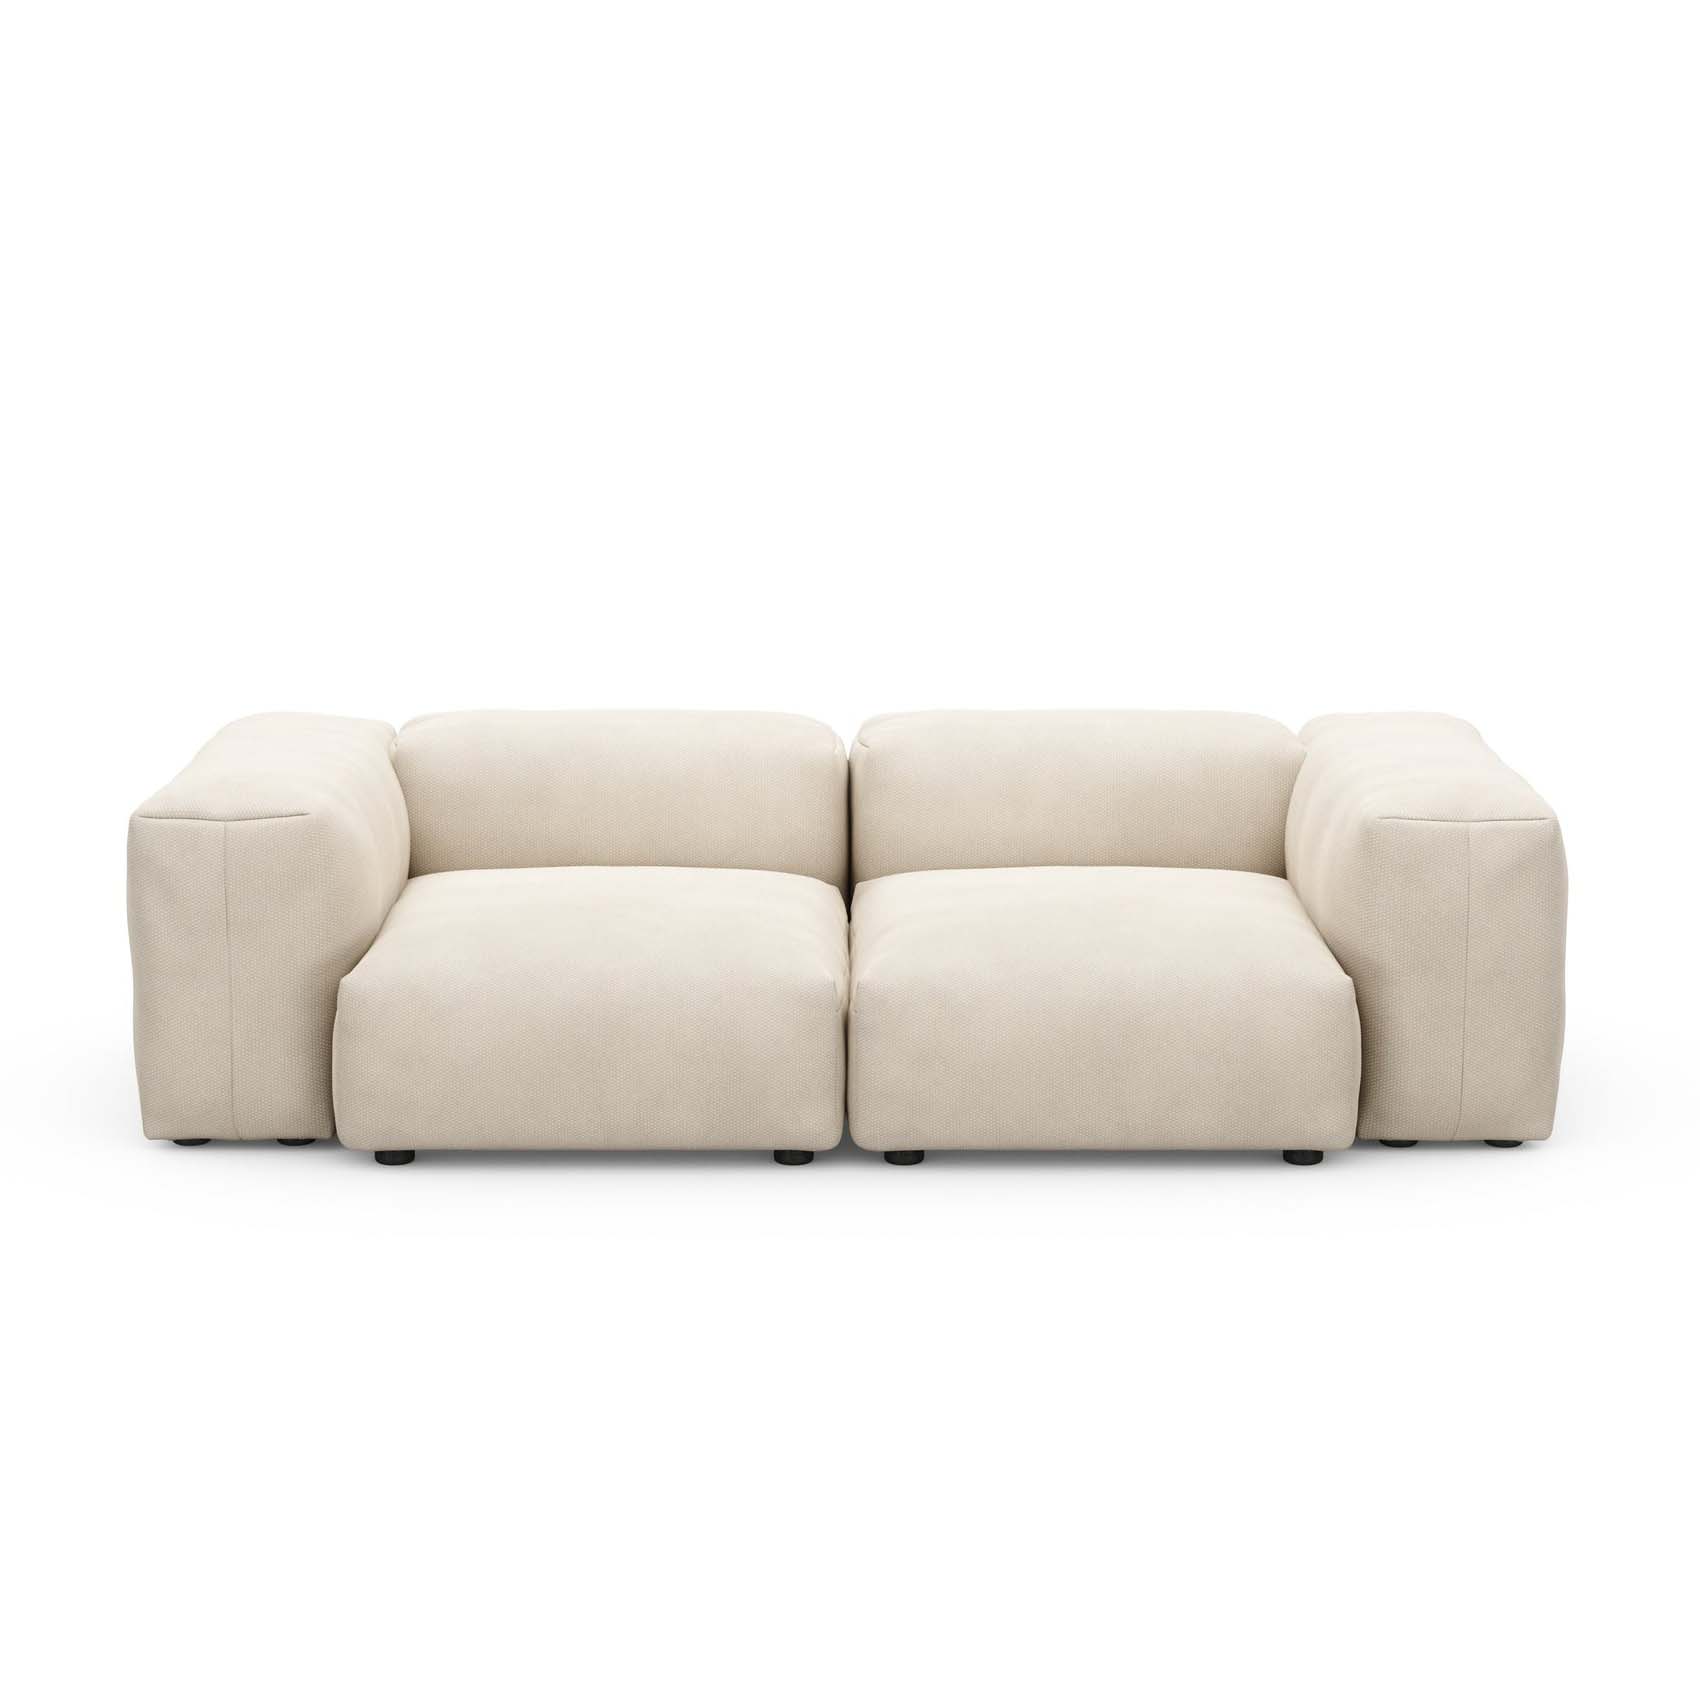 Two Seat Sofa S Knit Beige